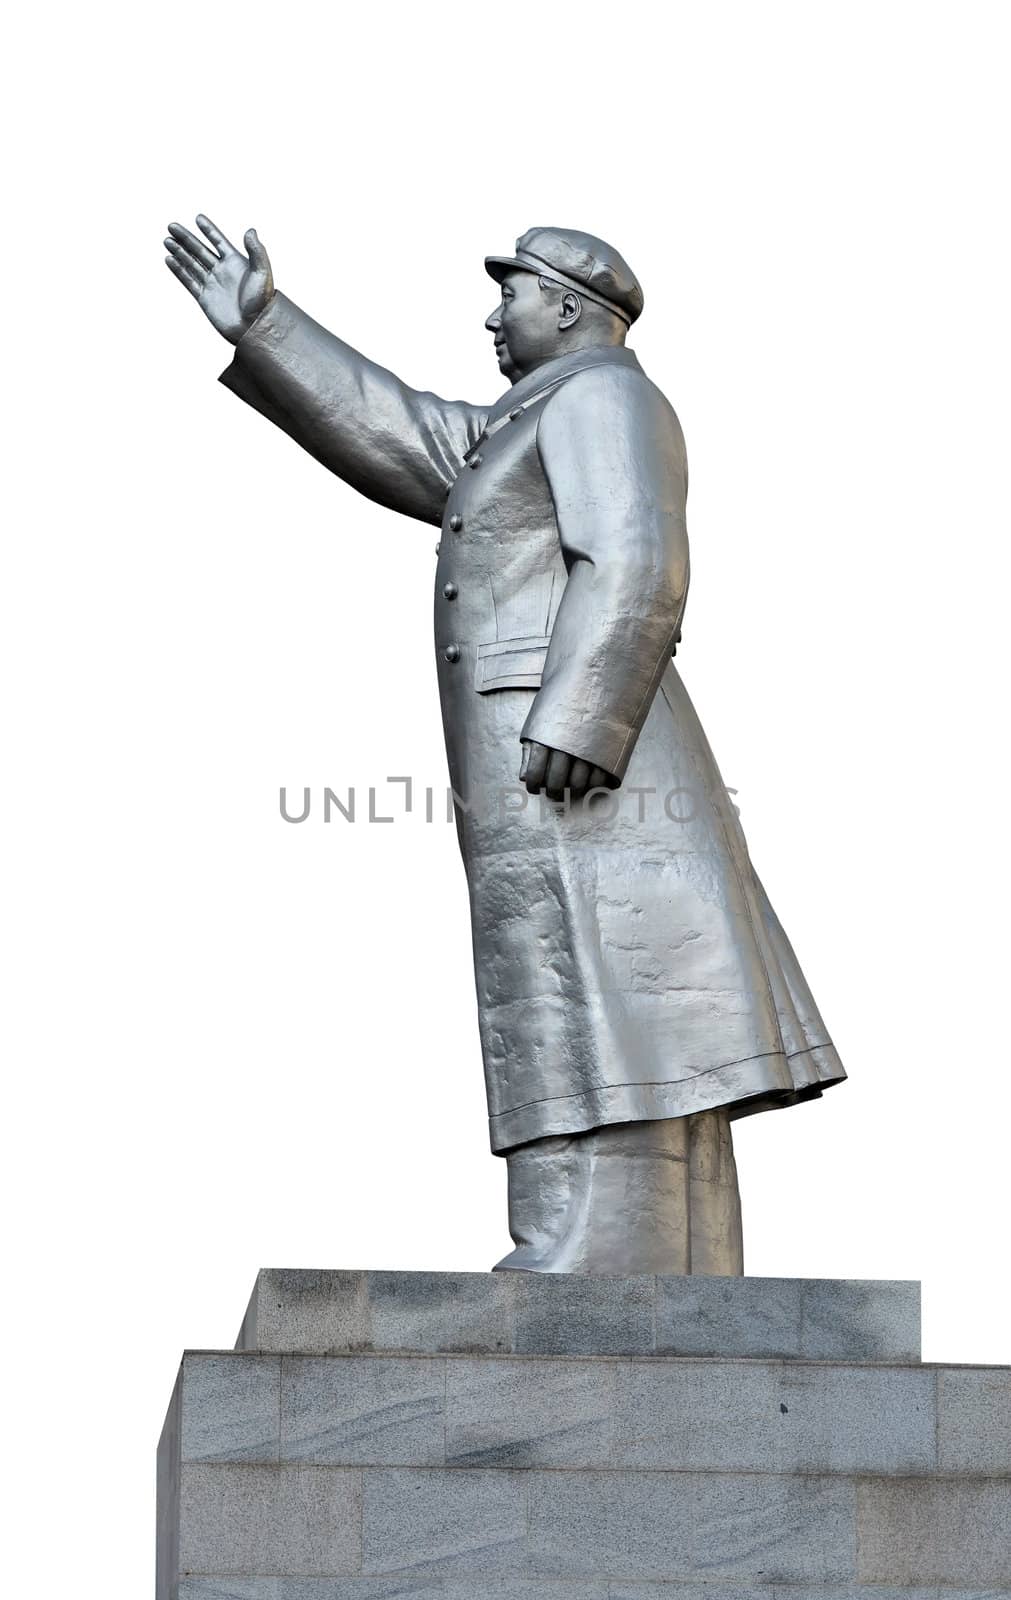 Mao monument by Vectorex